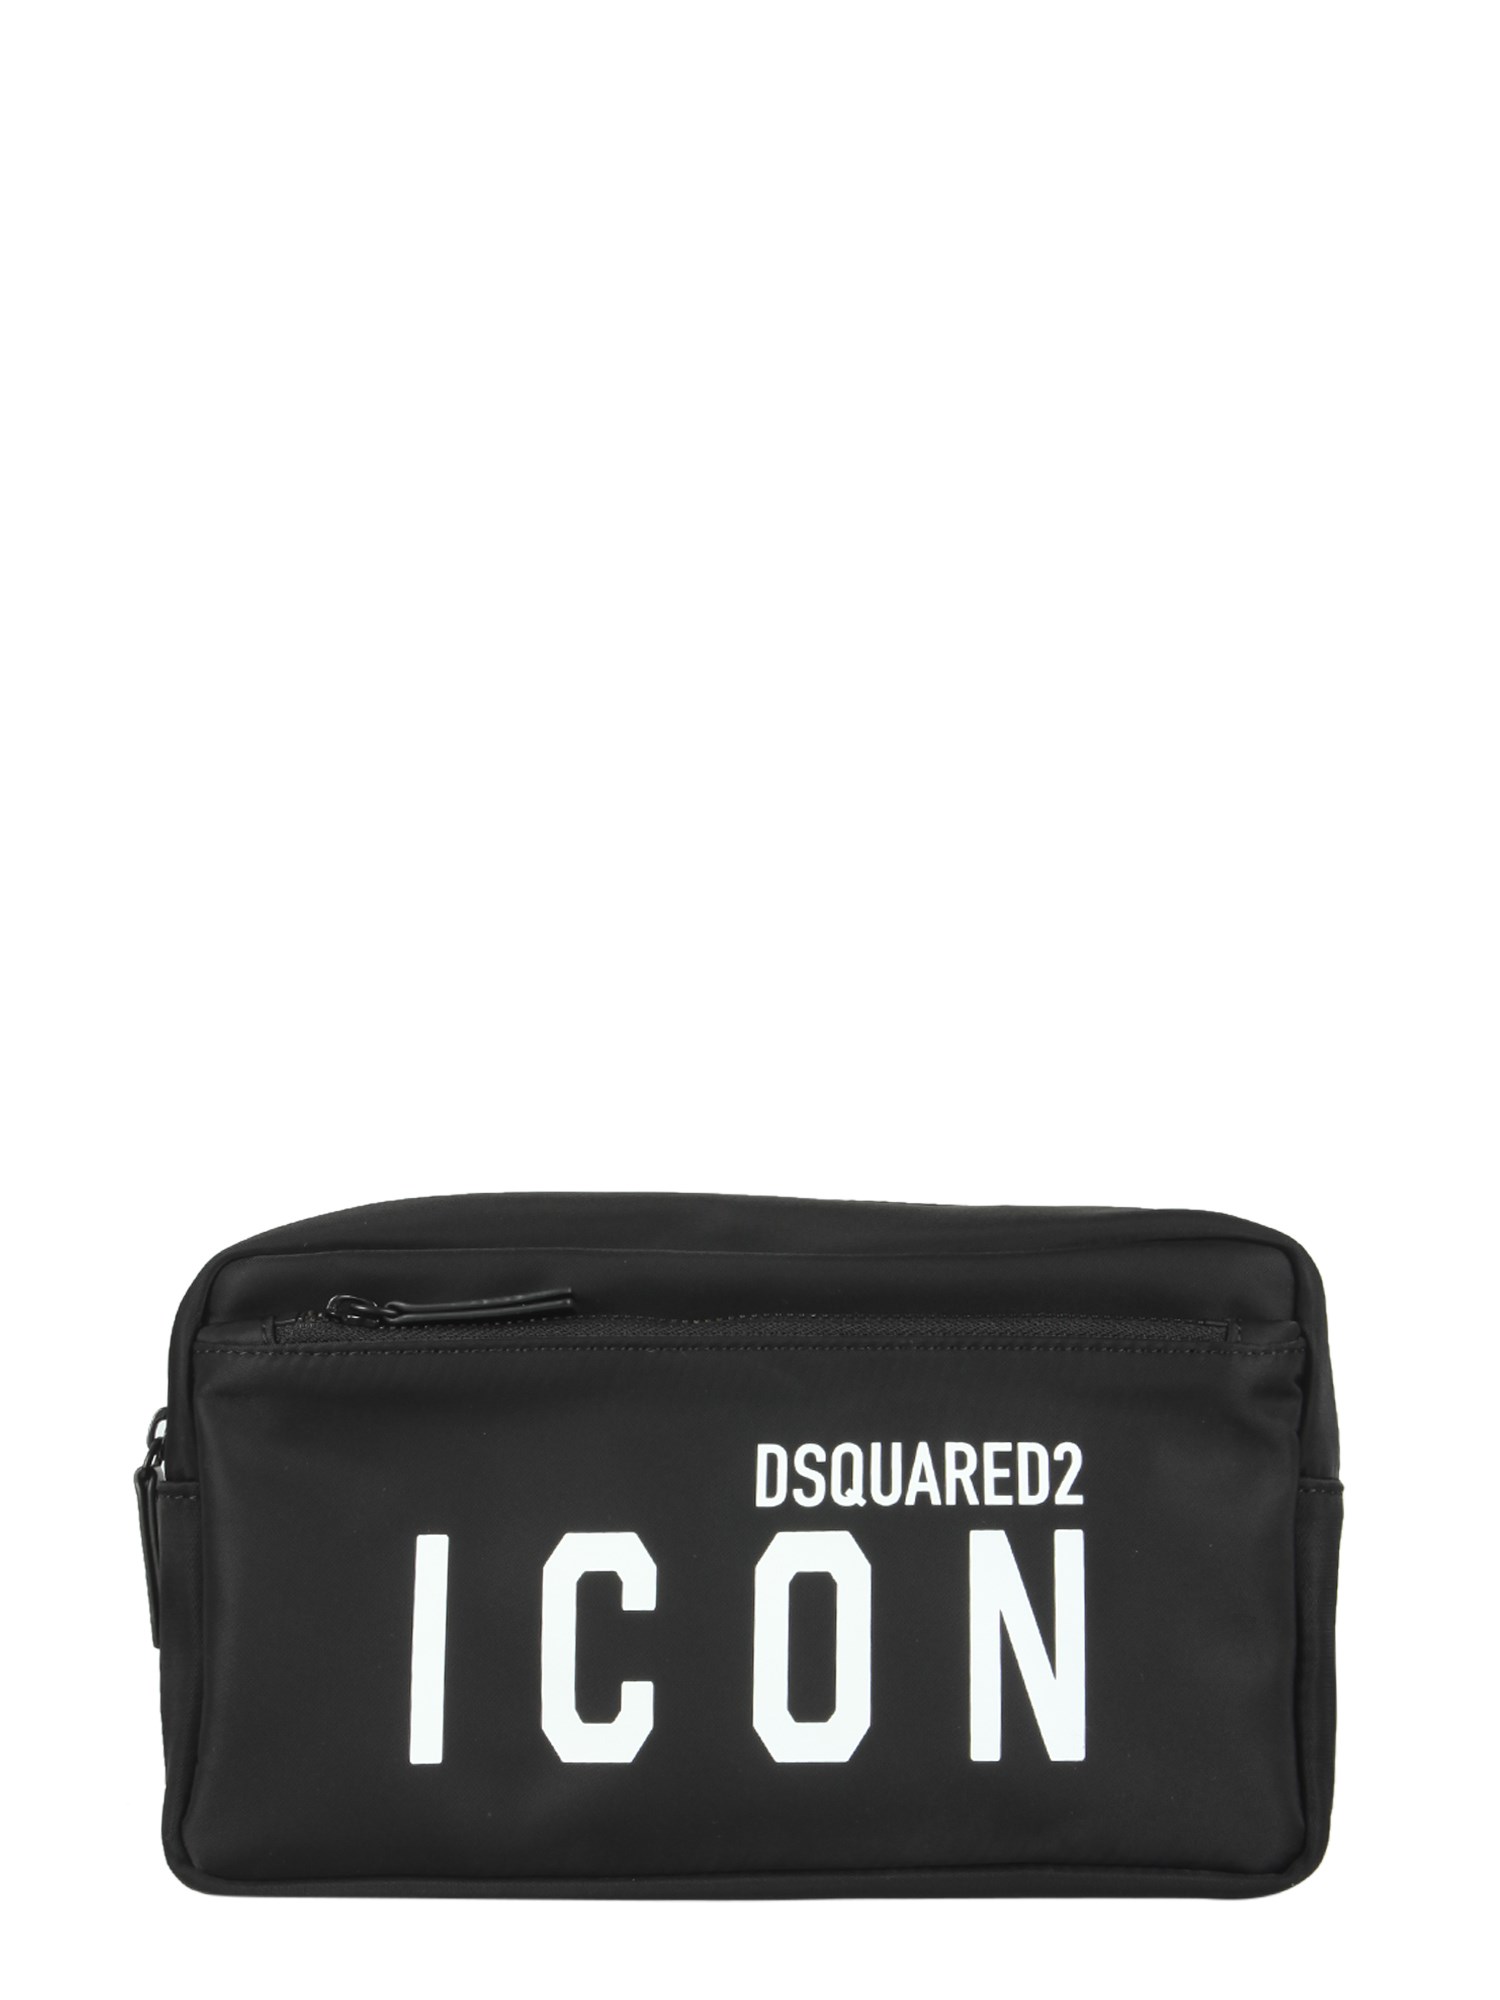 Dsquared2 Beauty Case With Icon Print In Black